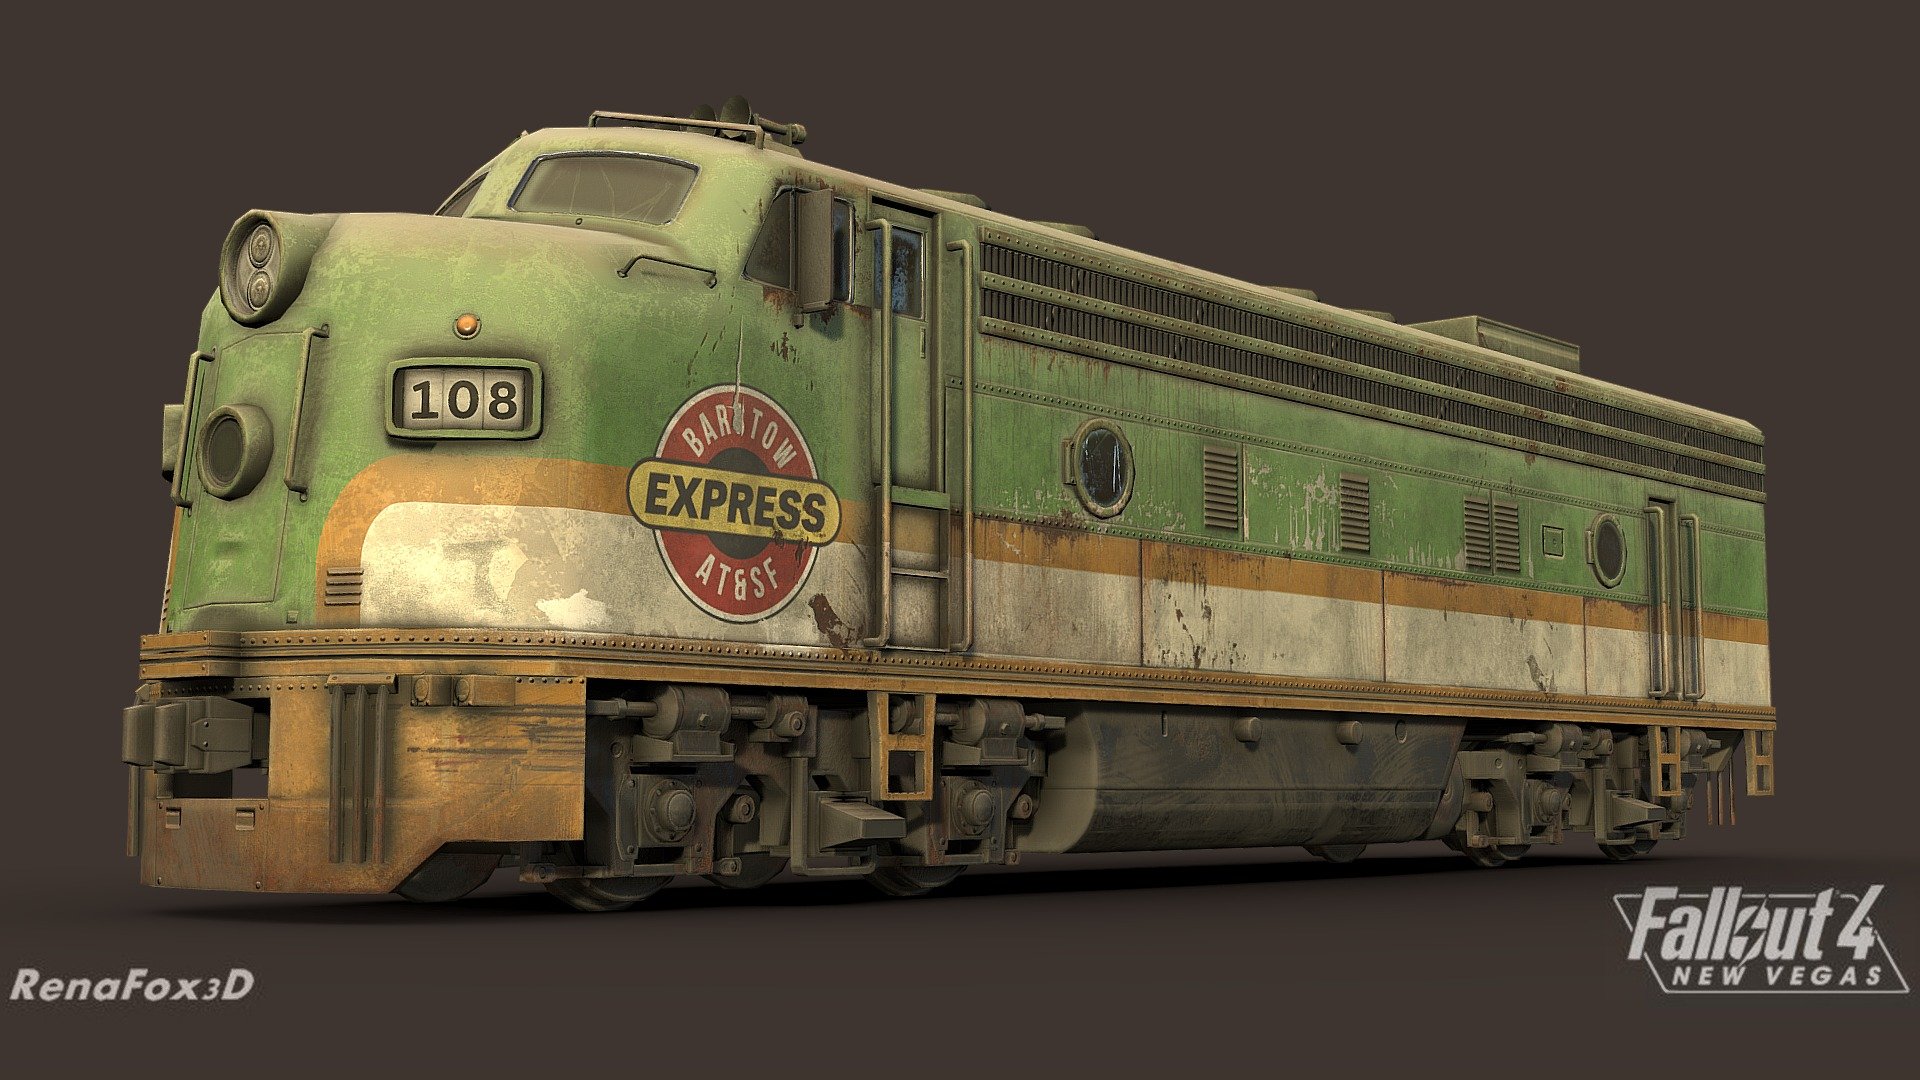 Train Engine made for the Fallout 4 New Vegas mod

Made in 3DSMax and Substance Painter - F4NV - Train Engine - 3D model by Renafox (@kryik1023) 3d model